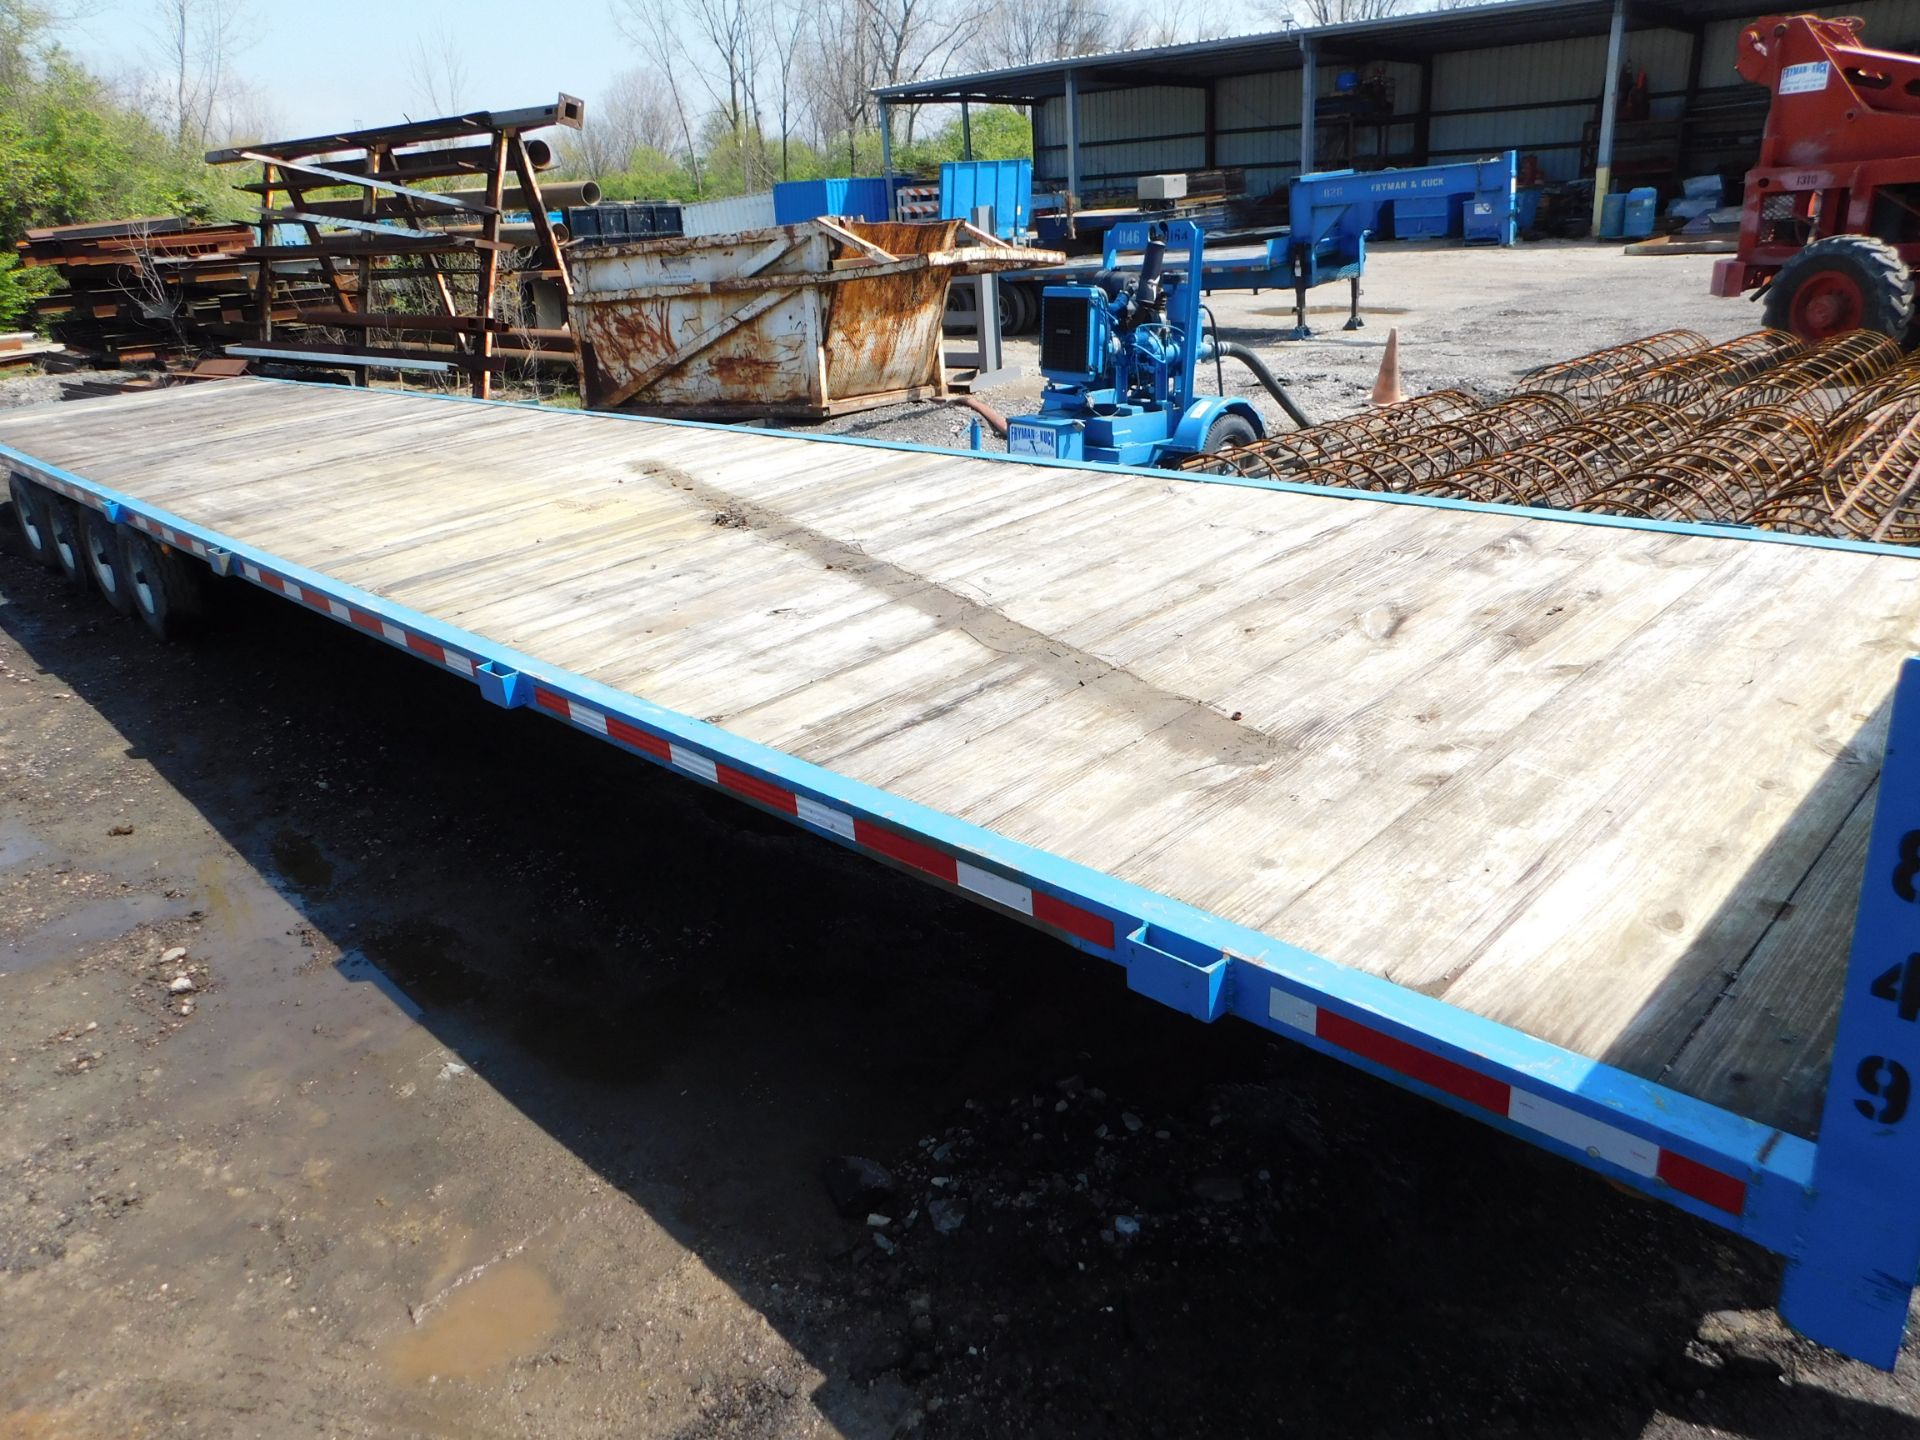 8' x 40' Flat Bed Tongue Pull Trailer, Wood Deck, Quad-Axle, 8-Wheels, Pintle Hitch - Image 2 of 11